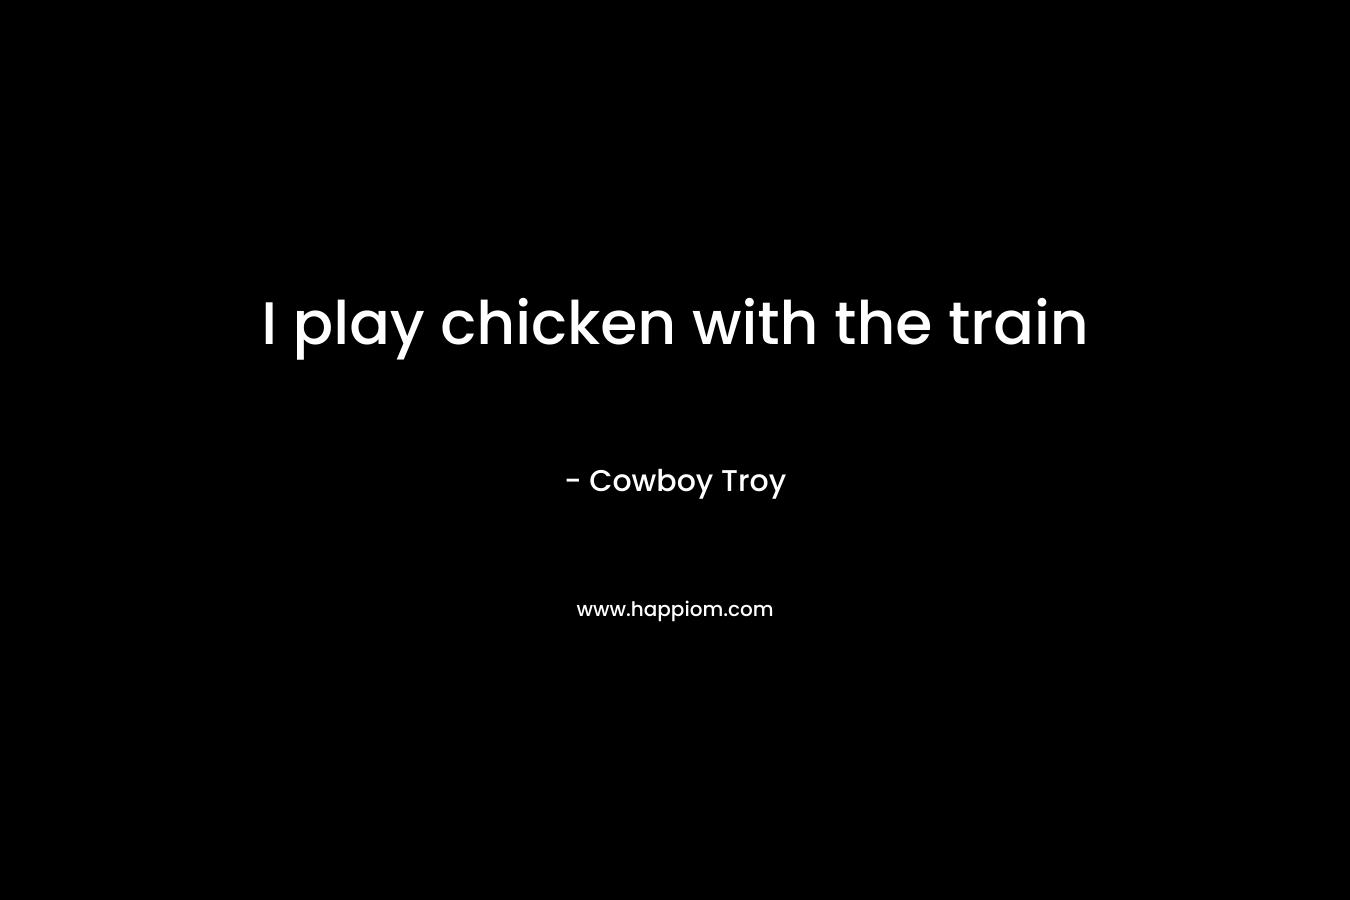 I play chicken with the train